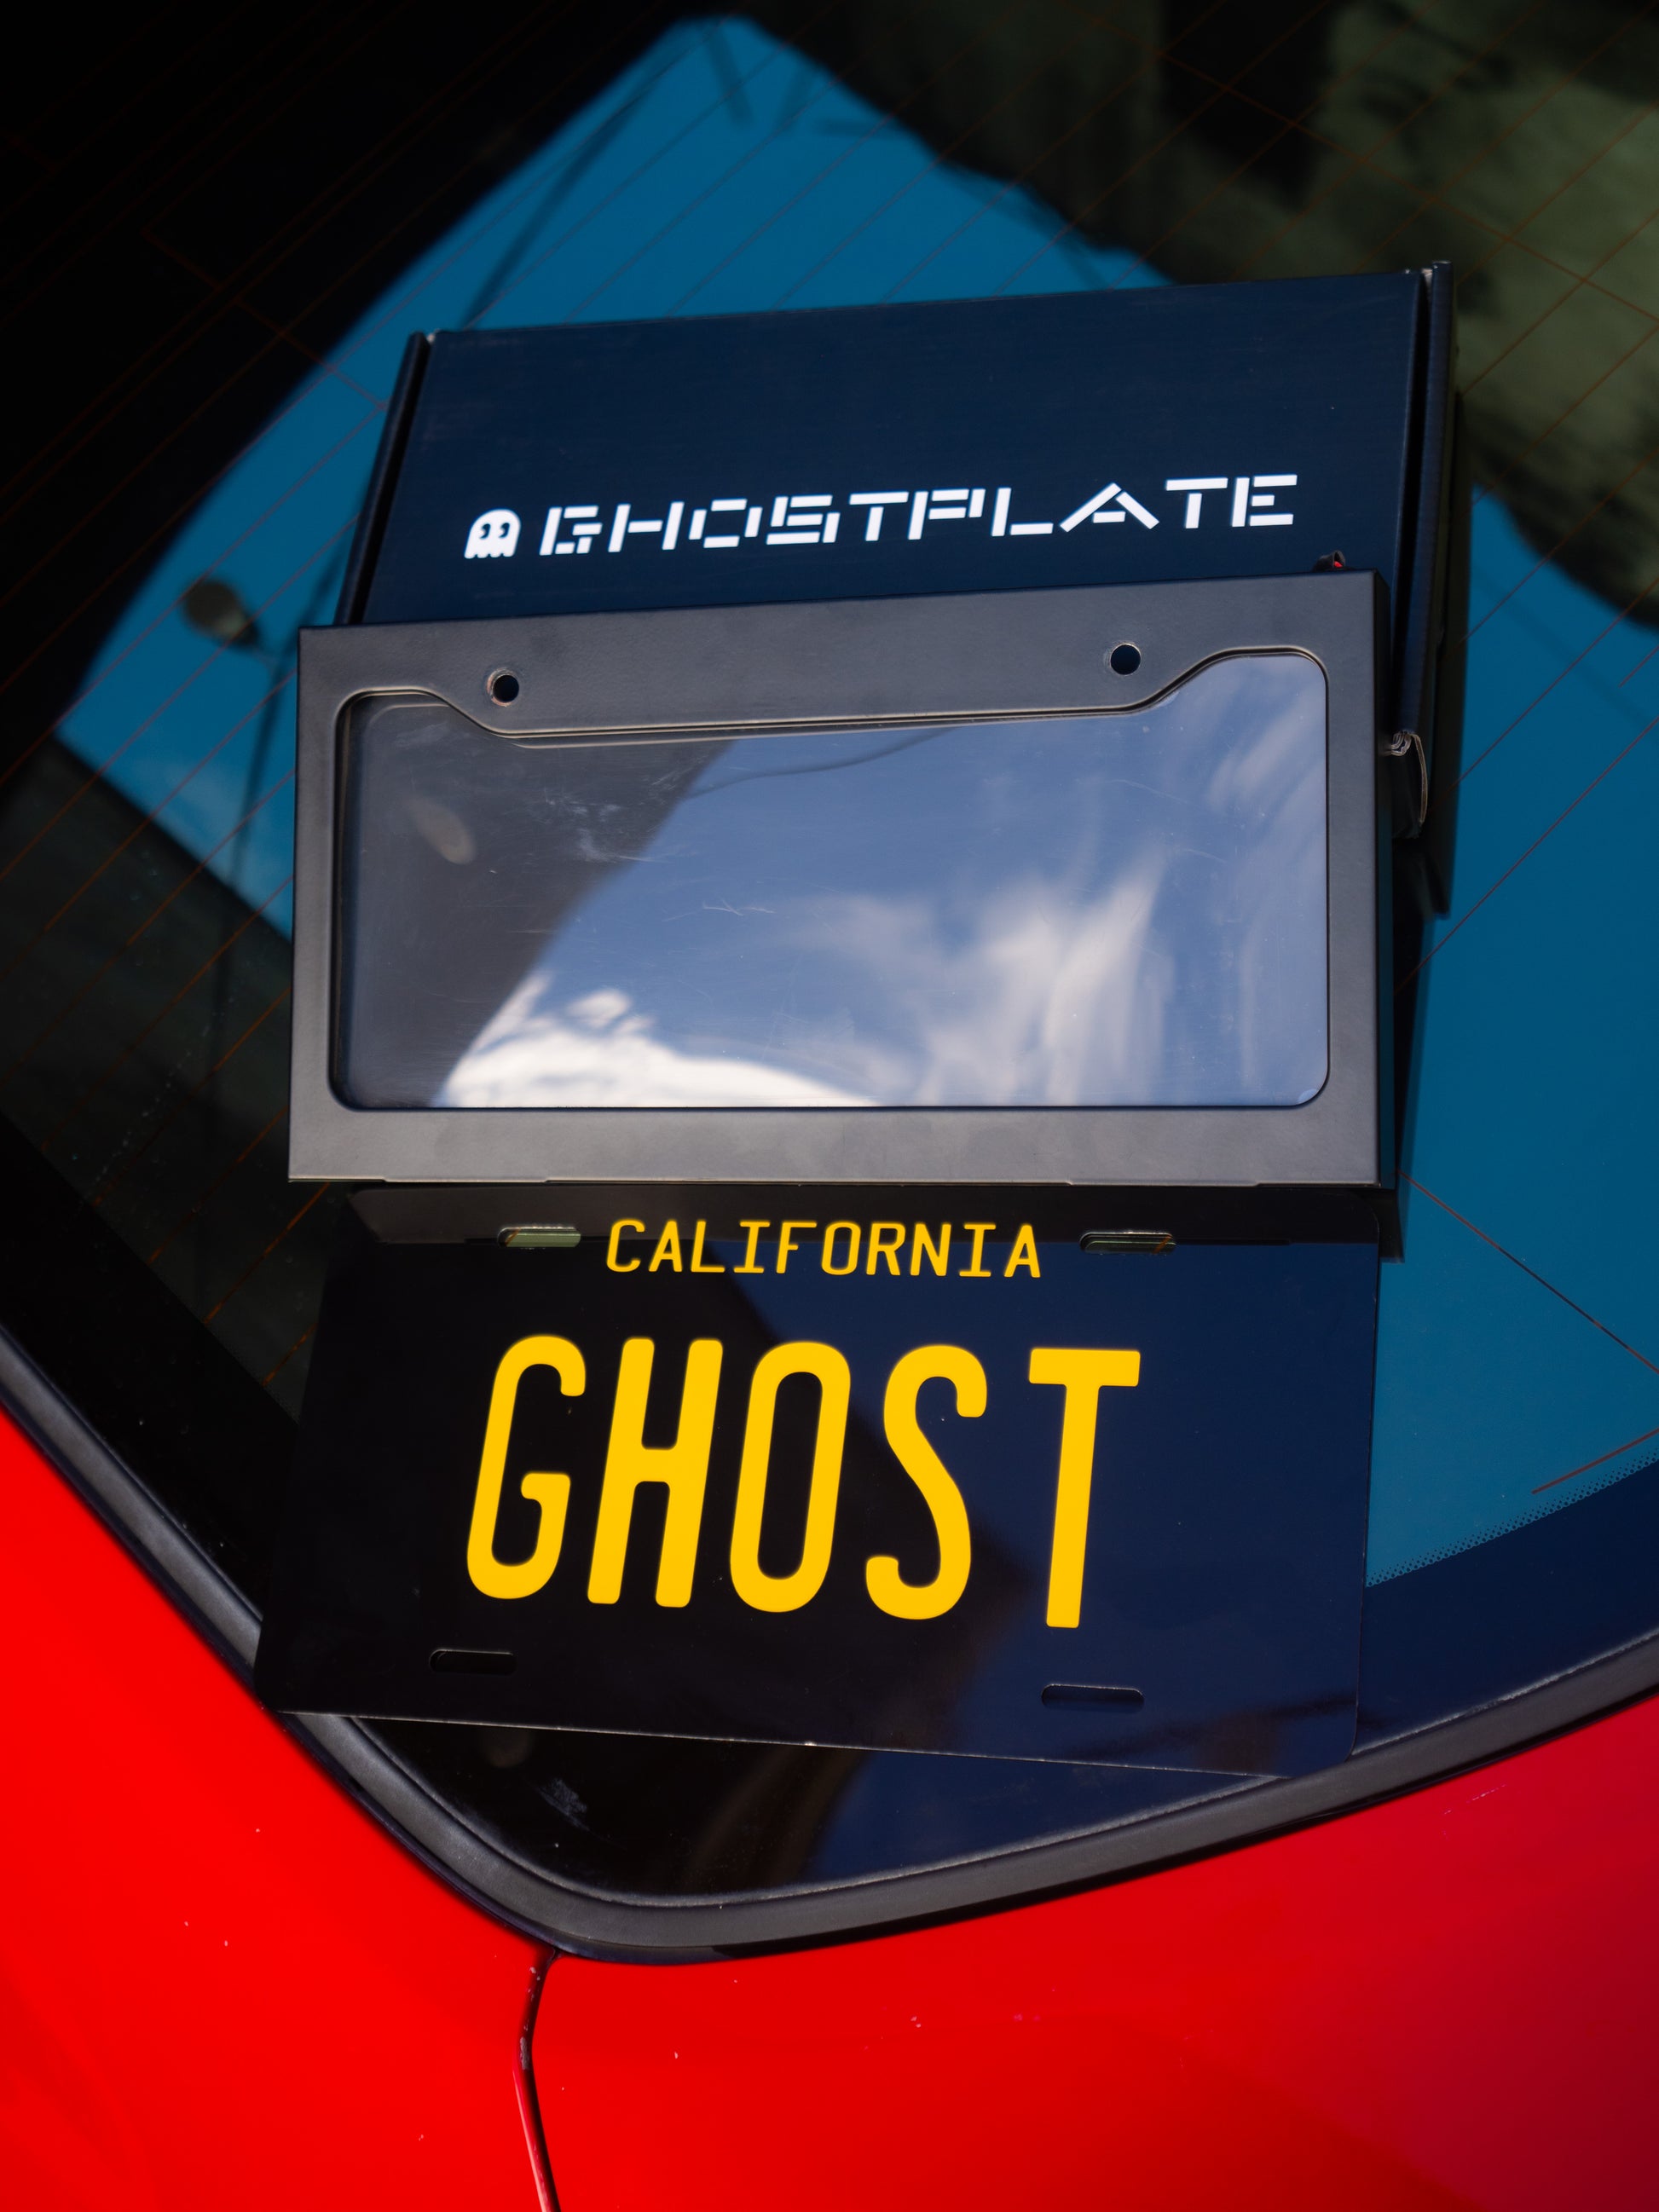 DIGITALMONSTER.US *RESTOCK* Chao license plate covers are back in